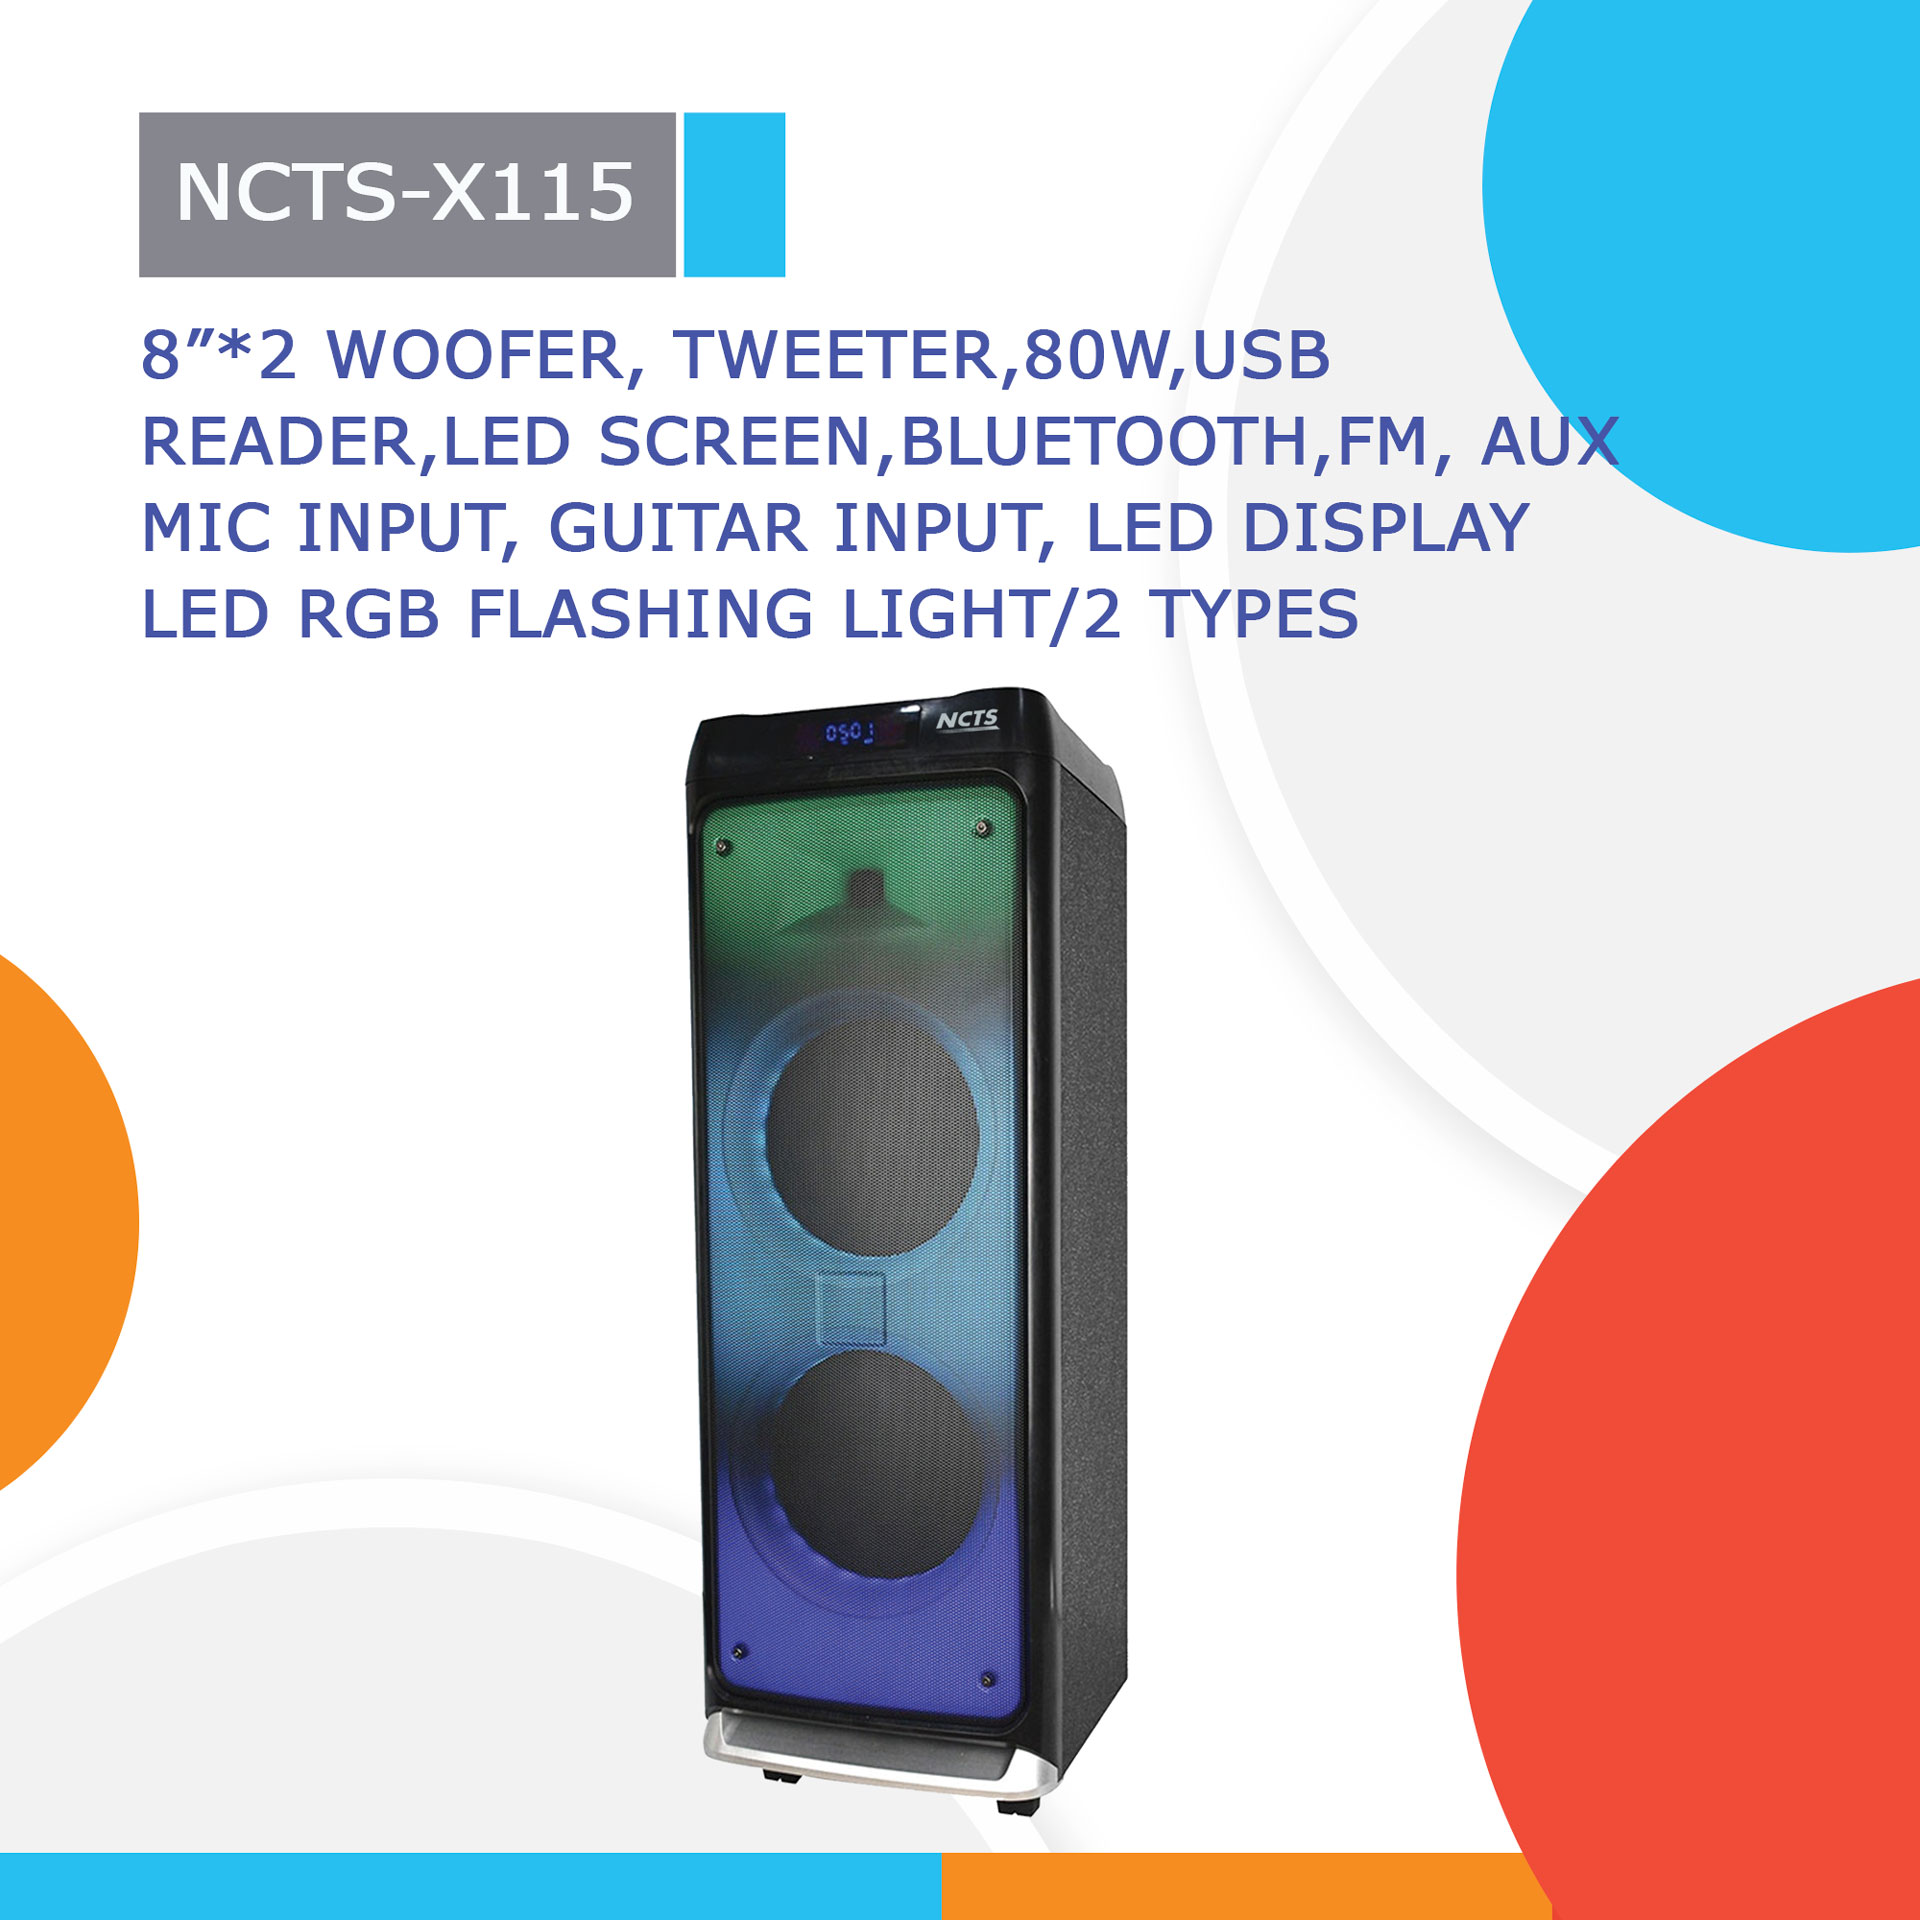 NCTS-X115